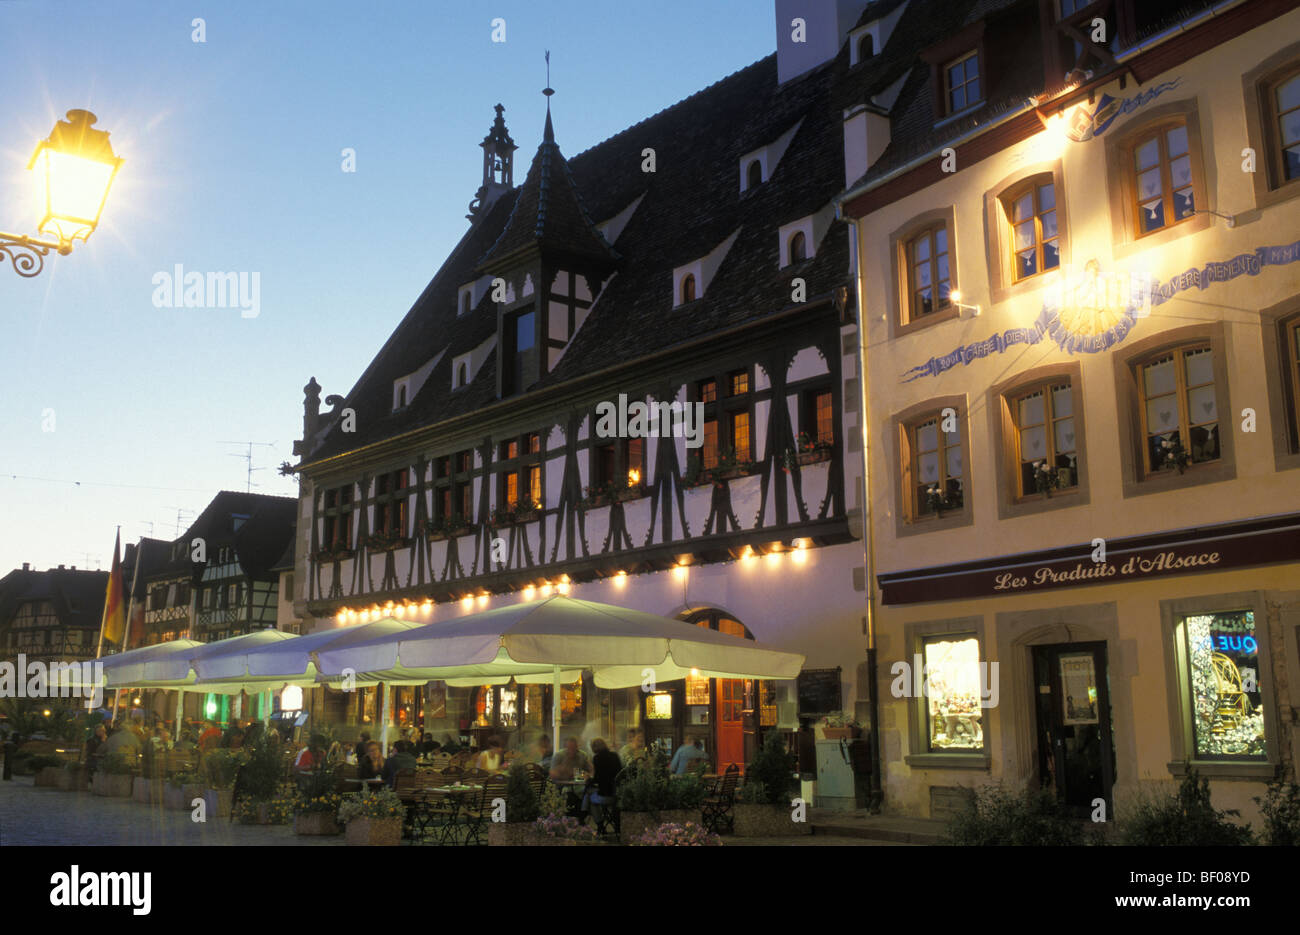 Restaurant La Halle Aux Bles at night in Obernai, Alsace, France Stock Photo